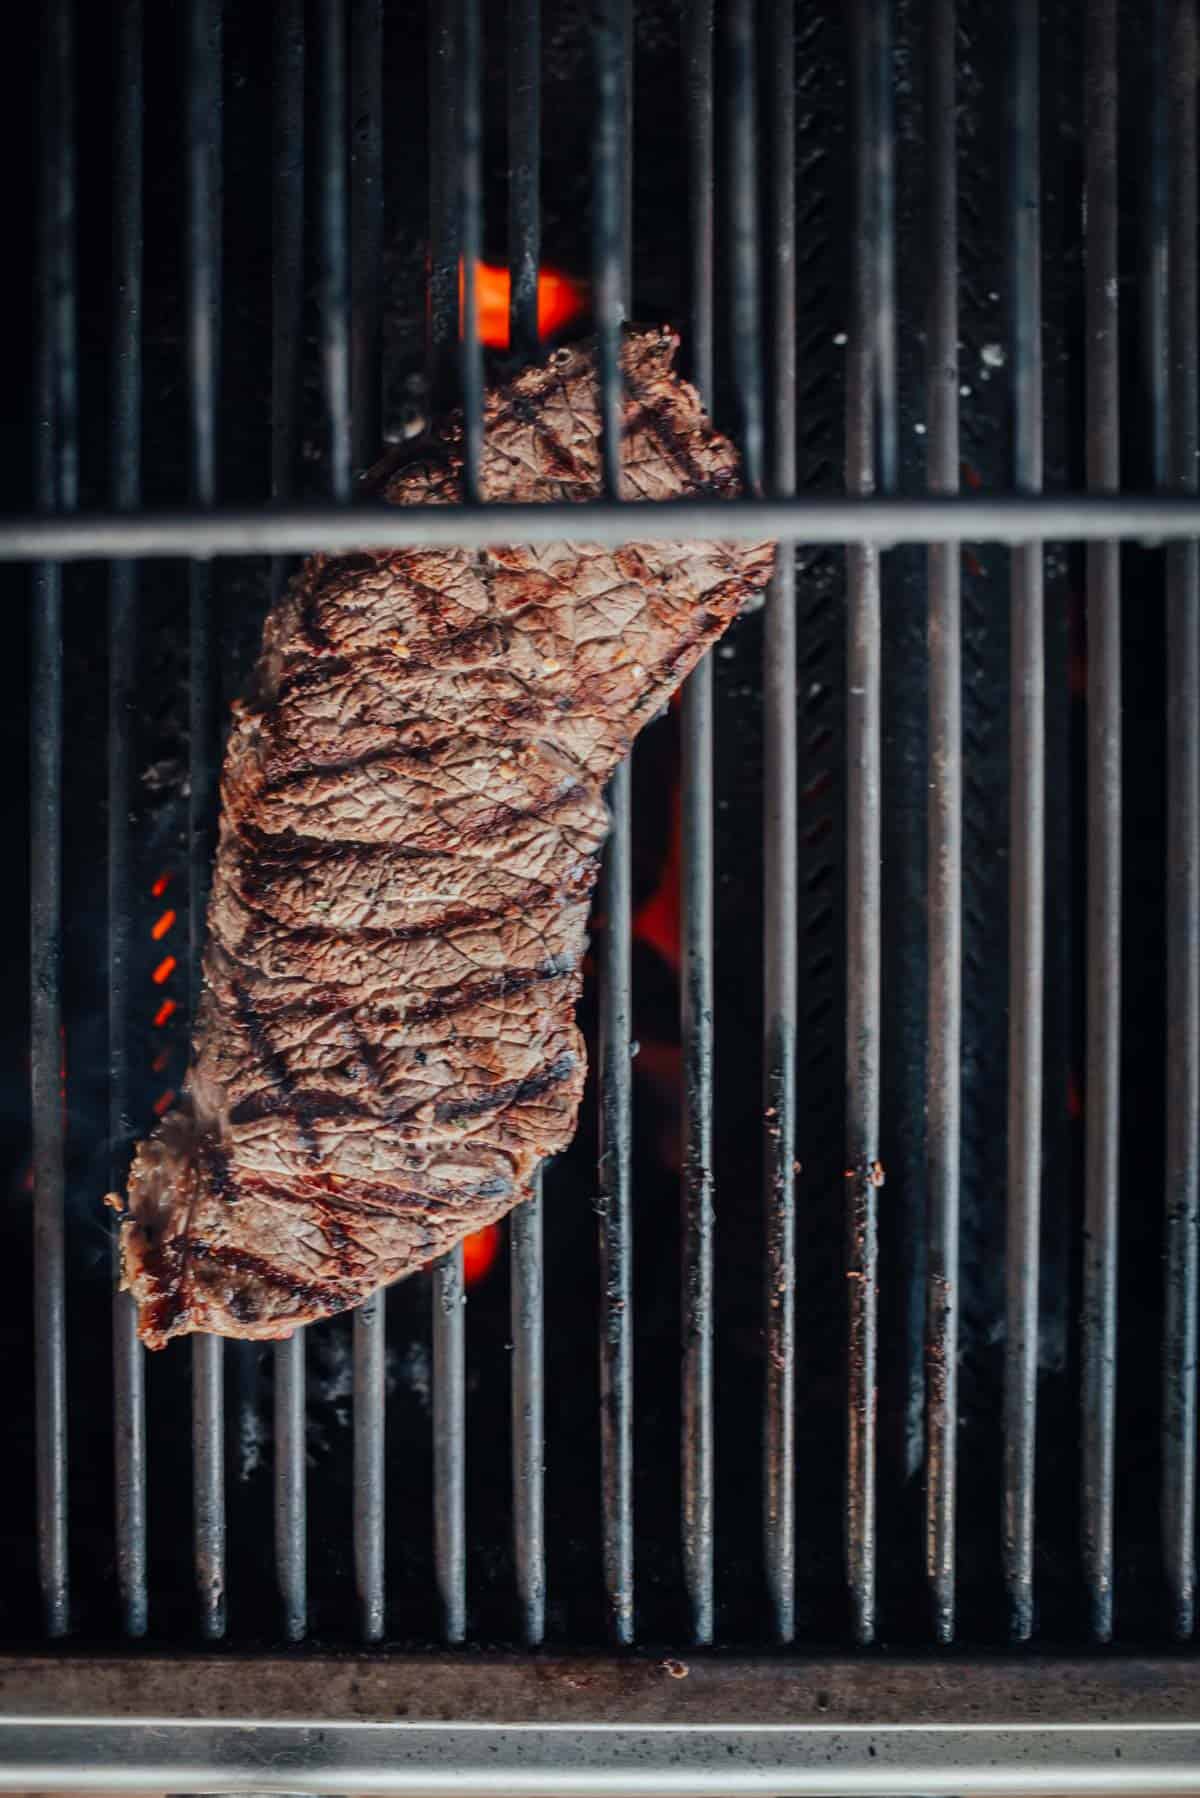 A london broil is being grilled on a barbecue, showing grill marks and flames beneath the grates.